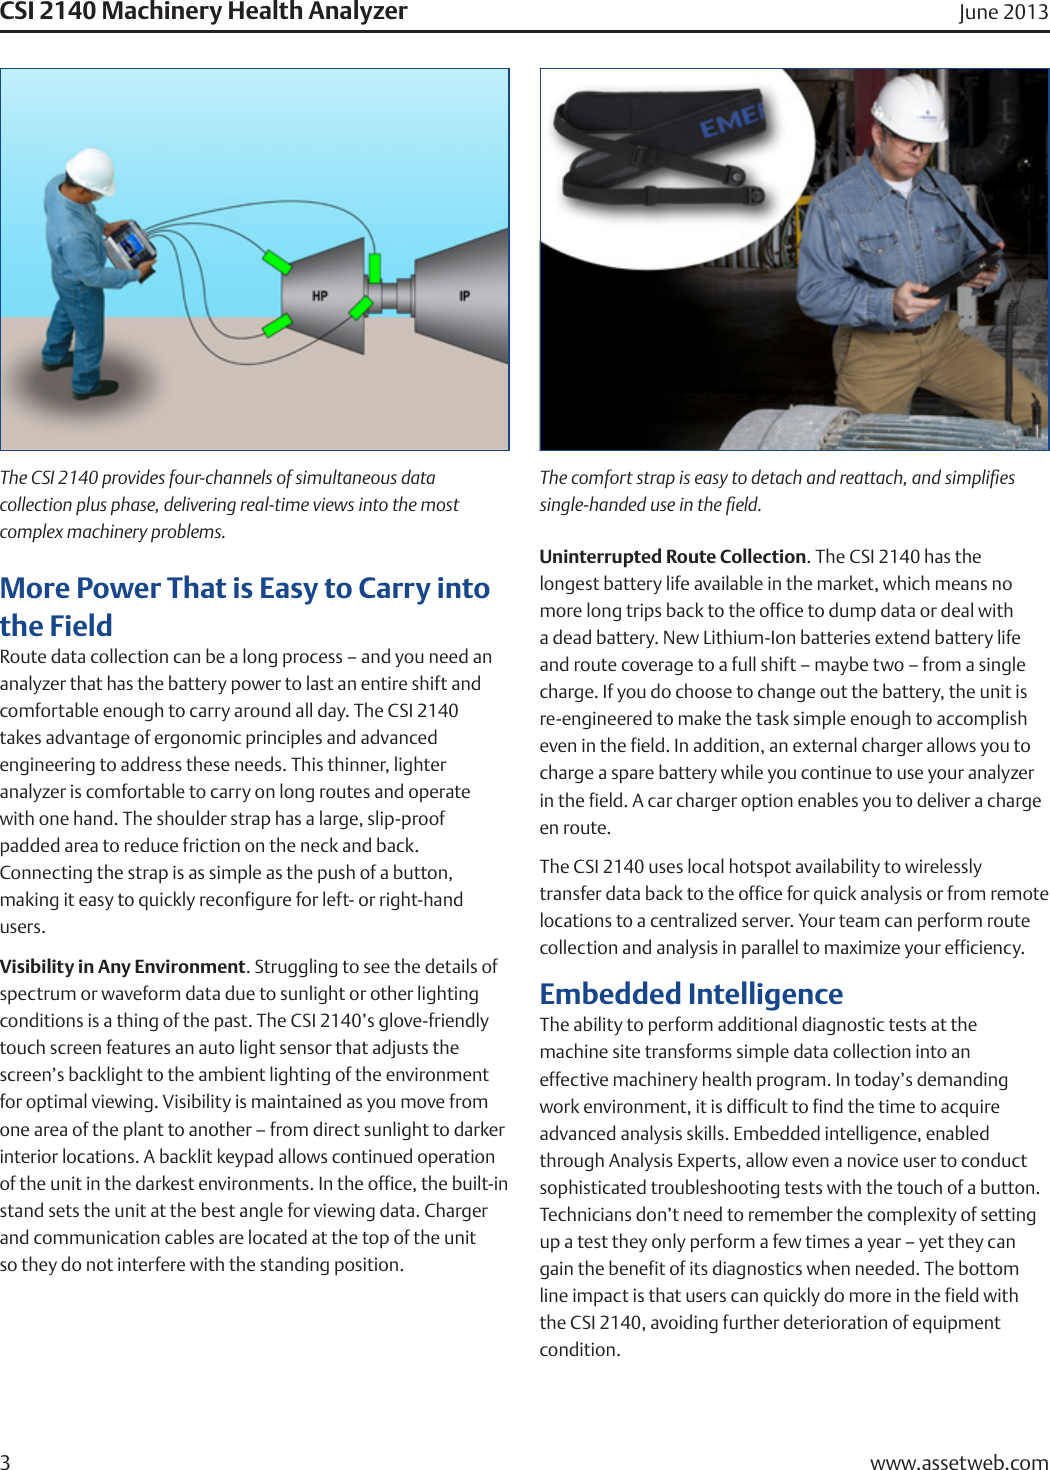 CSI 2140 Machinery Health Analyzer June 2013More Power That is Easy to Carry into the FieldRoute data collection can be a long process – and you need an analyzer that has the battery power to last an entire shift and comfortable enough to carry around all day. The CSI 2140  takes advantage of ergonomic principles and advanced    engineering to address these needs. This thinner, lighter  analyzer is comfortable to carry on long routes and operate with one hand. The shoulder strap has a large, slip-proof   padded area to reduce friction on the neck and back.    Connecting the strap is as simple as the push of a button,  making it easy to quickly reconfigure for left- or right-hand  users.Visibility in Any Environment. Struggling to see the details of spectrum or waveform data due to sunlight or other lighting conditions is a thing of the past. The CSI 2140’s glove-friendly touch screen features an auto light sensor that adjusts the screen’s backlight to the ambient lighting of the environment for optimal viewing. Visibility is maintained as you move from one area of the plant to another – from direct sunlight to darker interior locations. A backlit keypad allows continued operation of the unit in the darkest environments. In the office, the built-in stand sets the unit at the best angle for viewing data. Charger and communication cables are located at the top of the unit  so they do not interfere with the standing position.Uninterrupted Route Collection. The CSI 2140 has the  longest battery life available in the market, which means no more long trips back to the office to dump data or deal with a dead battery. New Lithium-Ion batteries extend battery life and route coverage to a full shift – maybe two – from a single charge. If you do choose to change out the battery, the unit is re-engineered to make the task simple enough to accomplish even in the field. In addition, an external charger allows you to charge a spare battery while you continue to use your analyzer in the field. A car charger option enables you to deliver a charge en route.The CSI 2140 uses local hotspot availability to wirelessly  transfer data back to the office for quick analysis or from remote locations to a centralized server. Your team can perform route collection and analysis in parallel to maximize your efficiency.Embedded IntelligenceThe ability to perform additional diagnostic tests at the    machine site transforms simple data collection into an    effective machinery health program. In today’s demanding work environment, it is difficult to find the time to acquire  advanced analysis skills. Embedded intelligence, enabled through Analysis Experts, allow even a novice user to conduct sophisticated troubleshooting tests with the touch of a button. Technicians don’t need to remember the complexity of setting up a test they only perform a few times a year – yet they can gain the benefit of its diagnostics when needed. The bottom line impact is that users can quickly do more in the field with  the CSI 2140, avoiding further deterioration of equipment  condition.www.assetweb.com3The CSI 2140 provides four-channels of simultaneous data    collection plus phase, delivering real-time views into the most  complex machinery problems.The comfort strap is easy to detach and reattach, and simplies single-handed use in the eld.